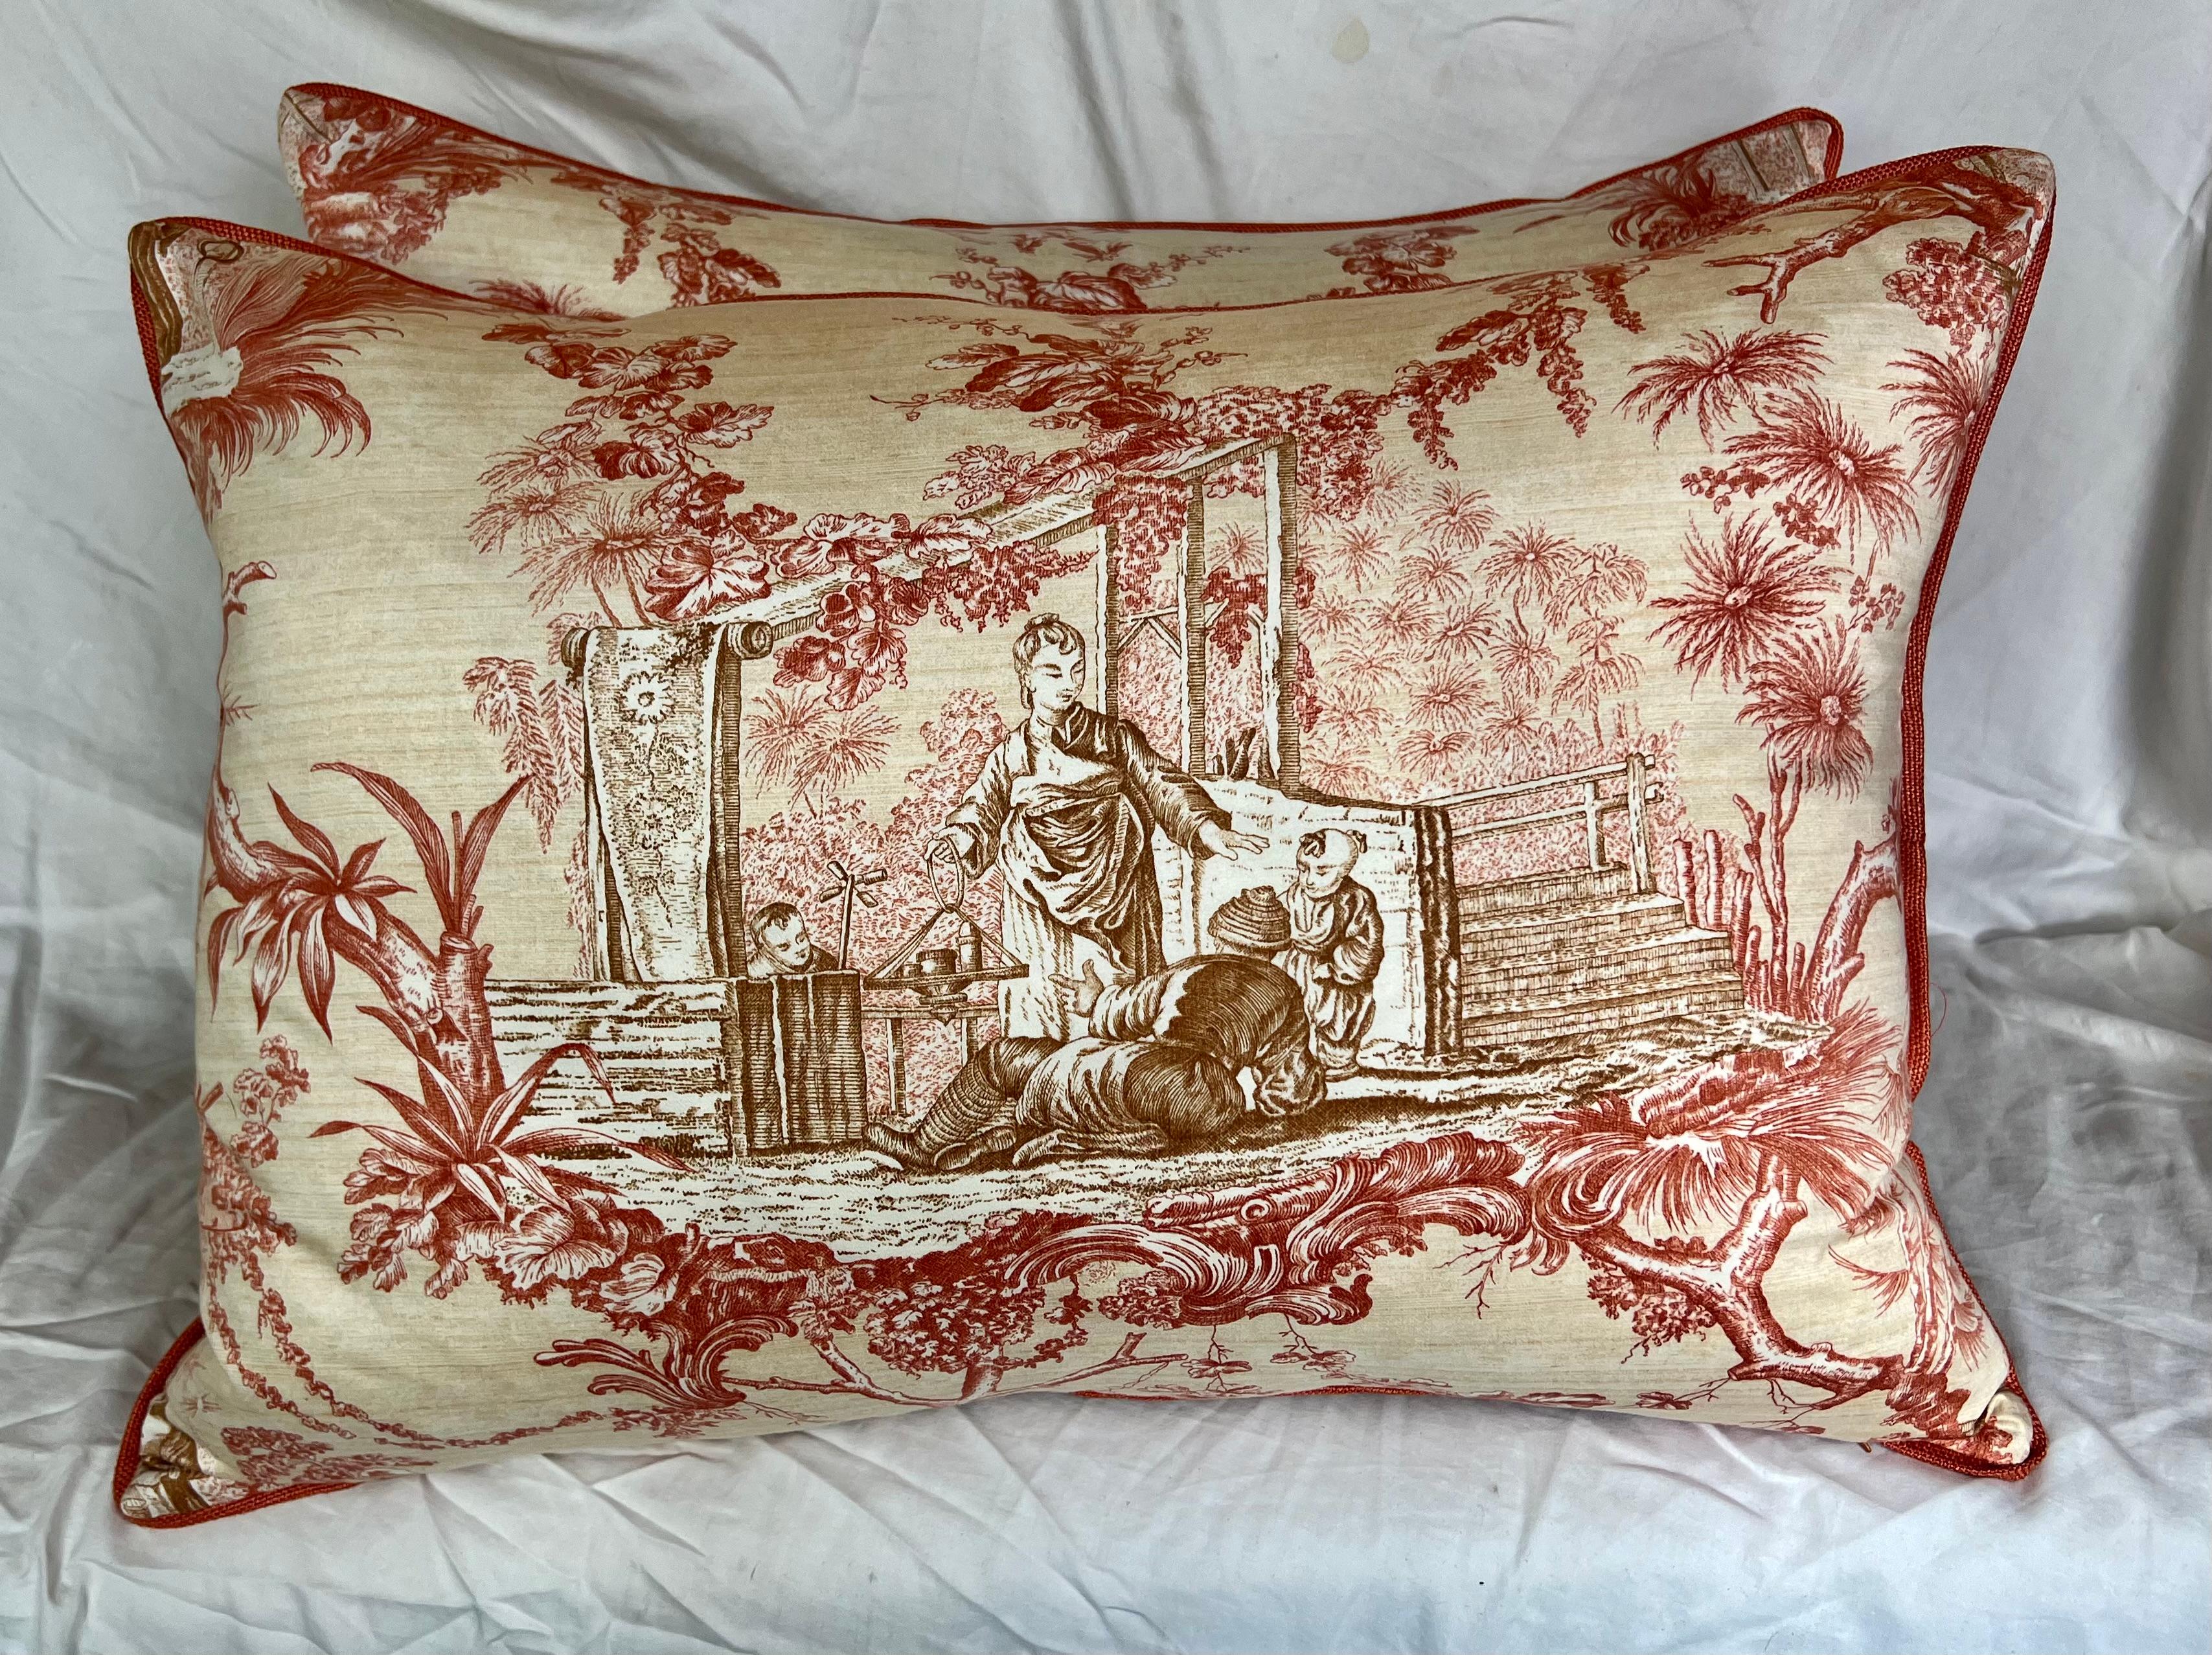 Custom chinoiserie-style patterned pillows are absolutely captiviating.  The scene includes a group of people engaged in discussion amidst red flowers and foliage, that creates a rich and immersive visual experience.  The coordinating linen on the